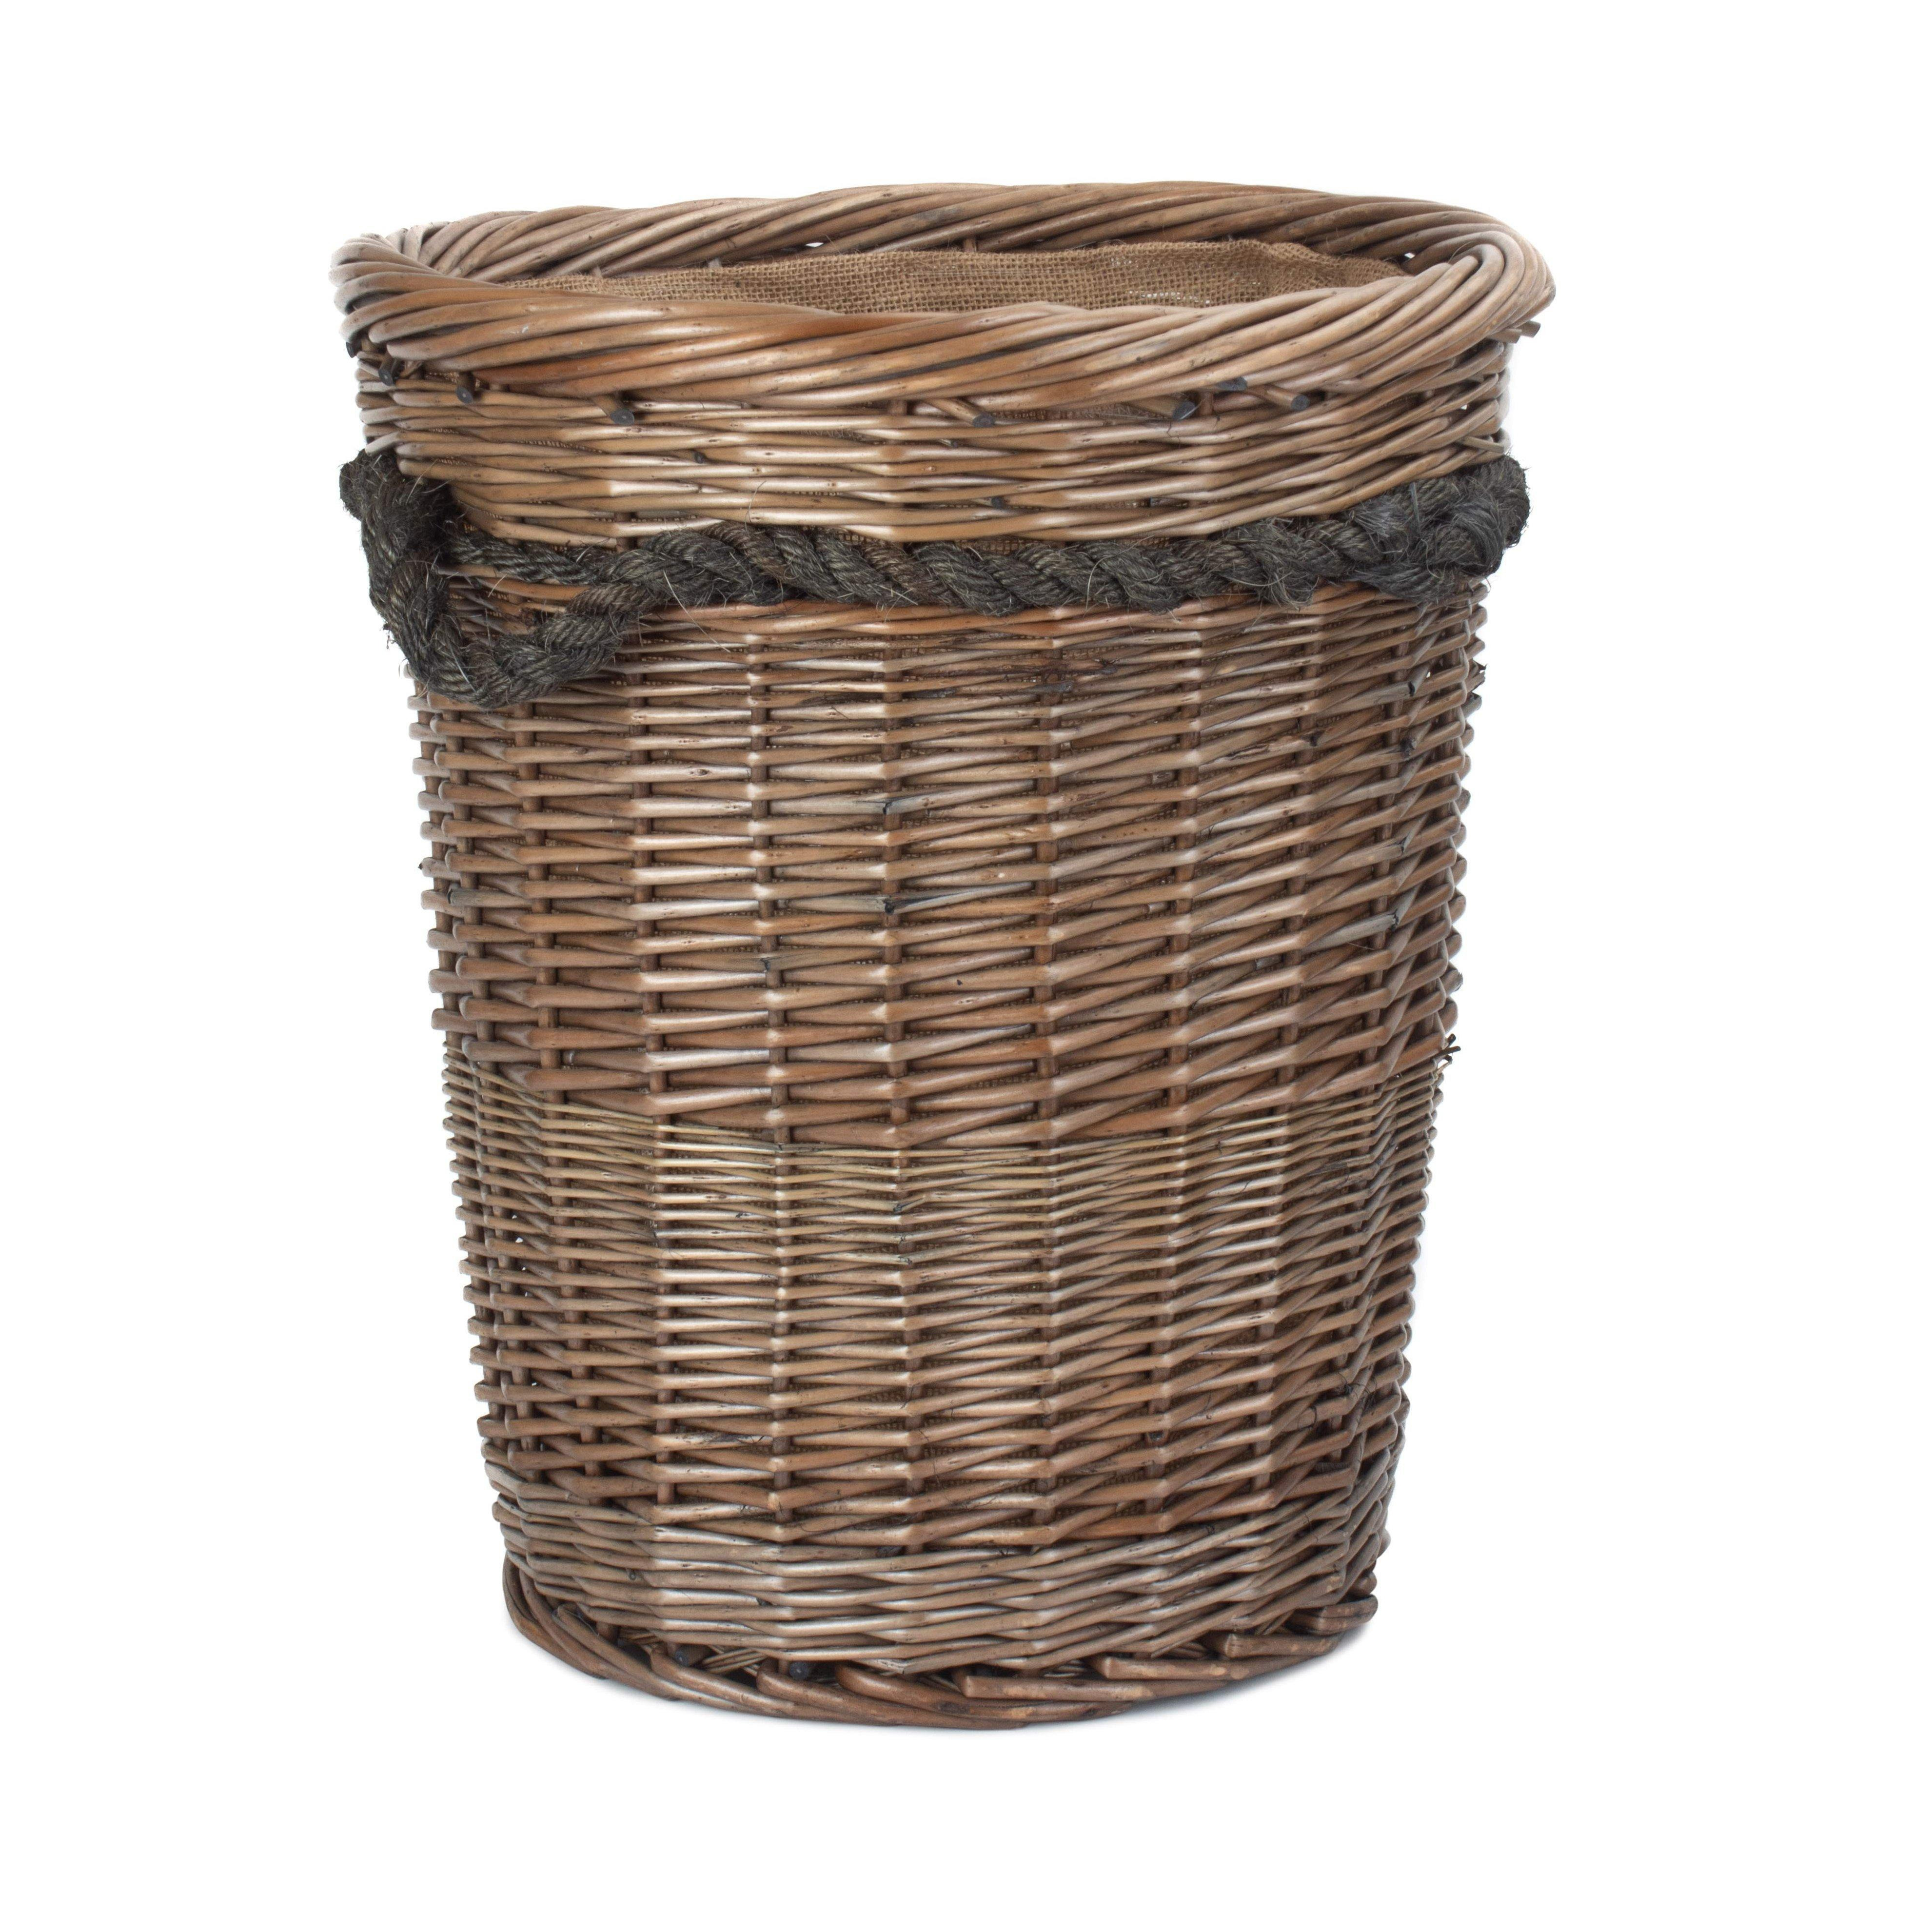 Wicker Tall Deluxe Hessian Lined Rope Handled Log Basket - image 1